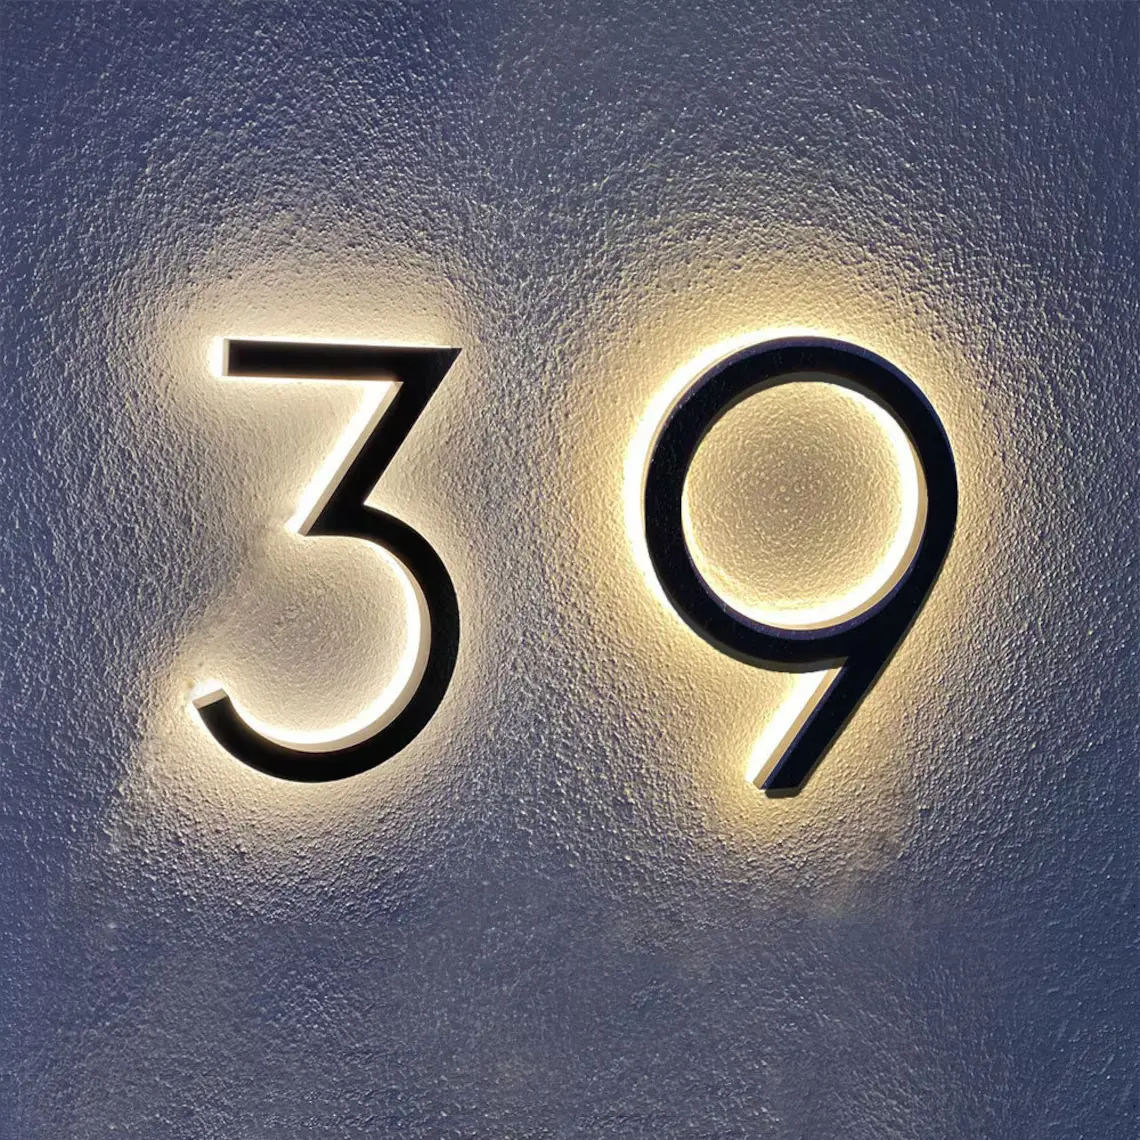 Electronic Apartment Building Sign House Numbers Led Illuminated Sign light numbers for house